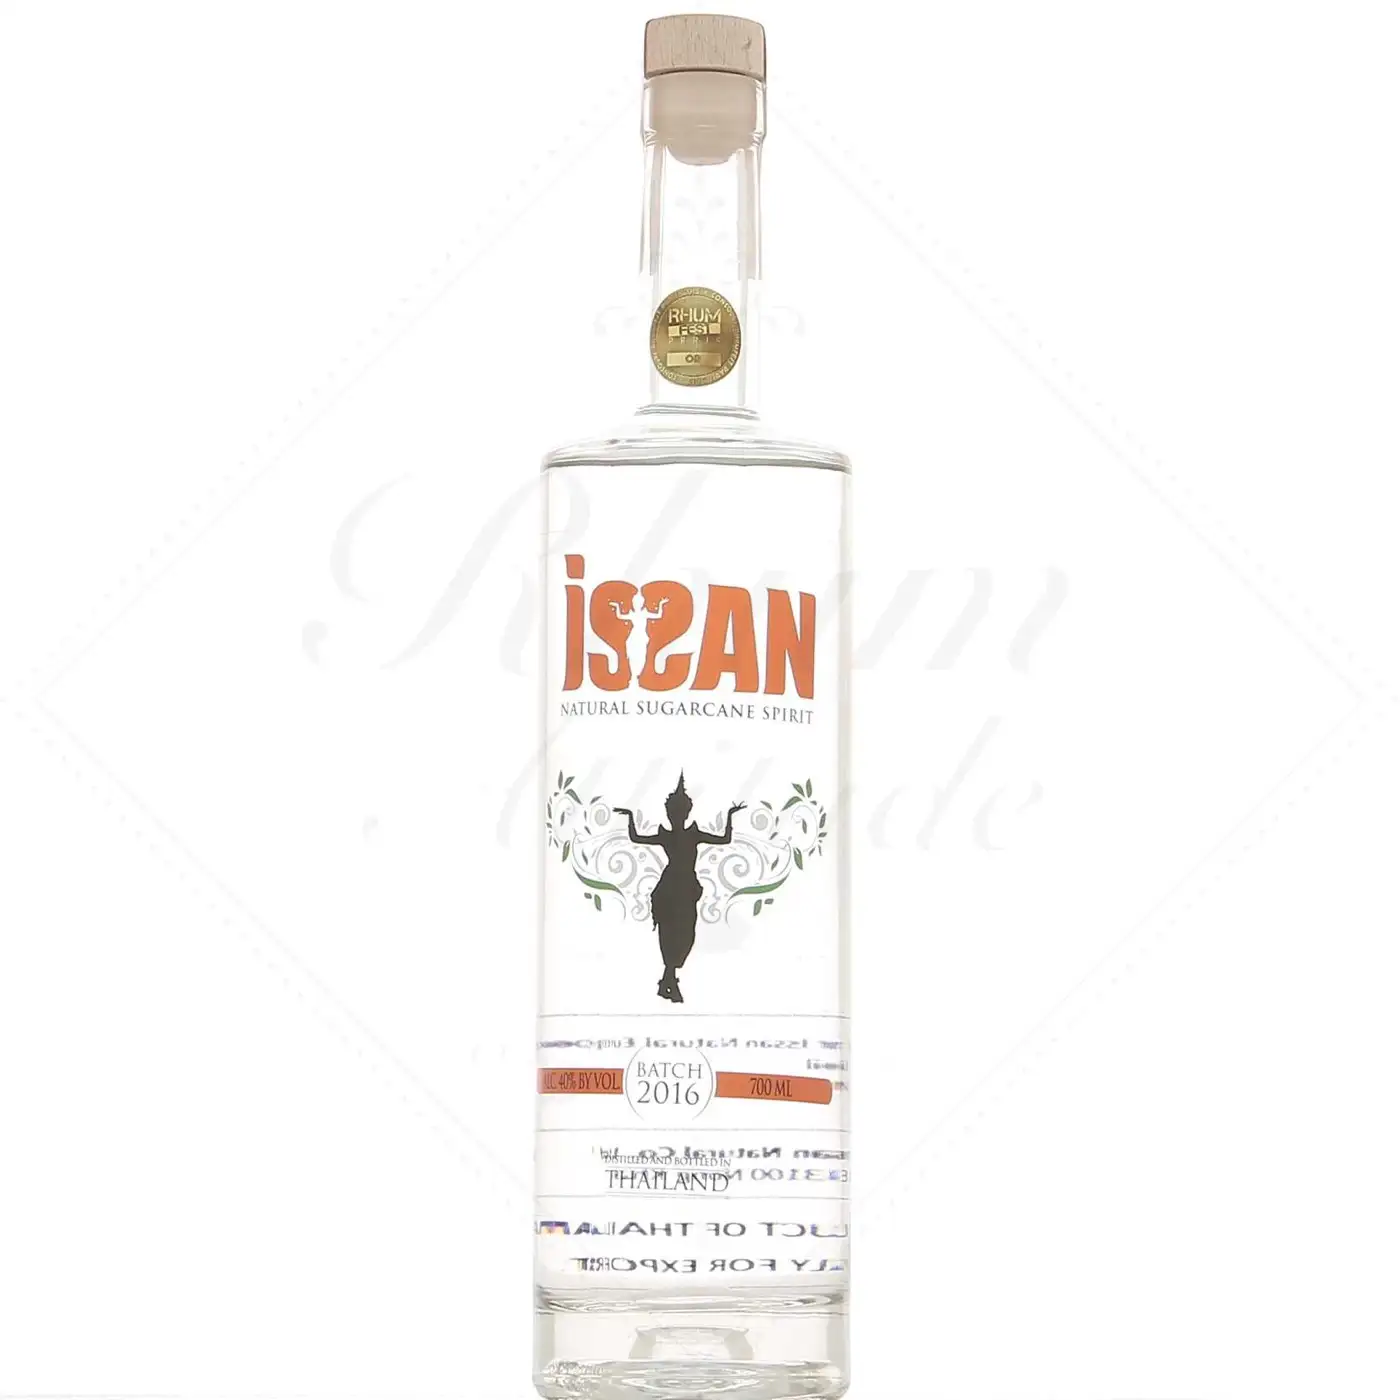 Image of the front of the bottle of the rum White